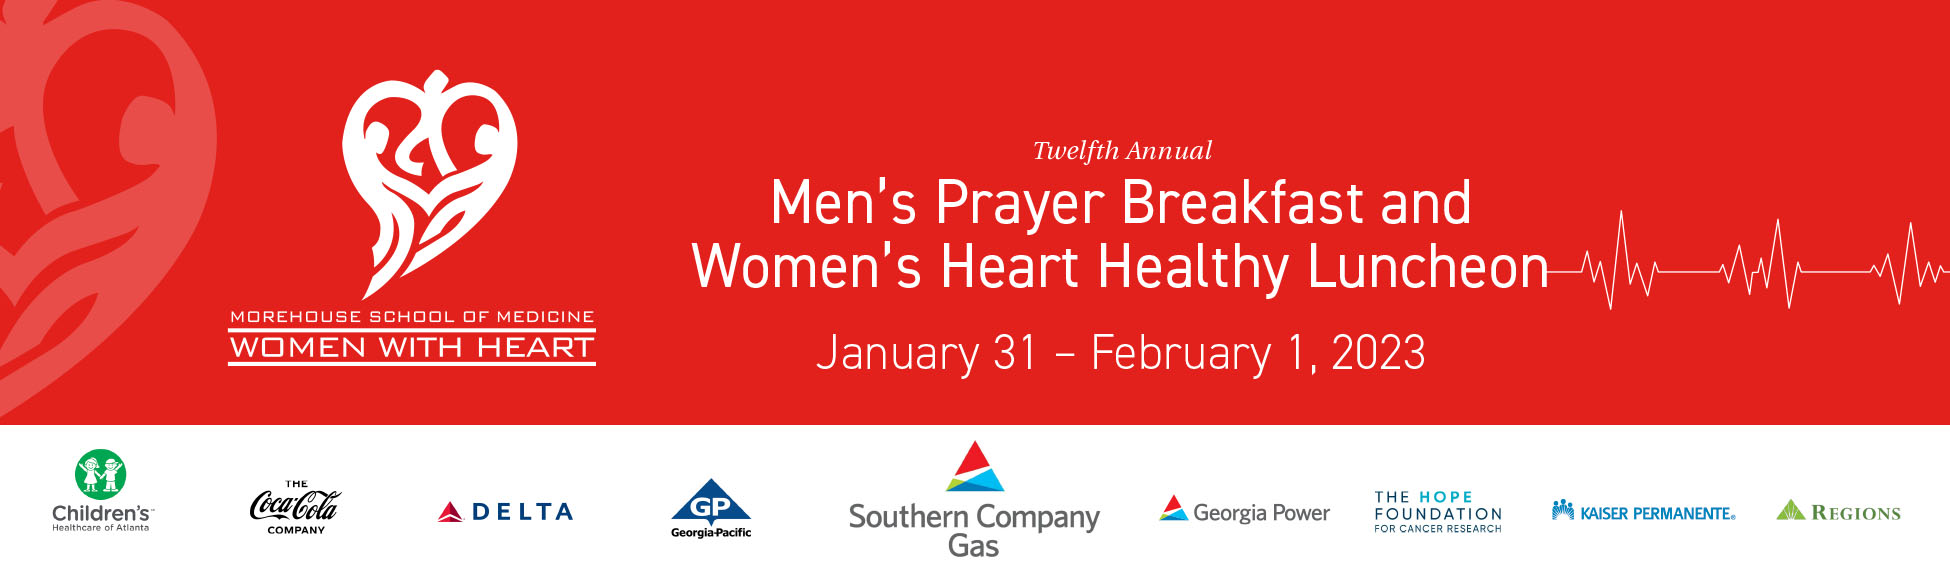 Women with Heart Luncheon